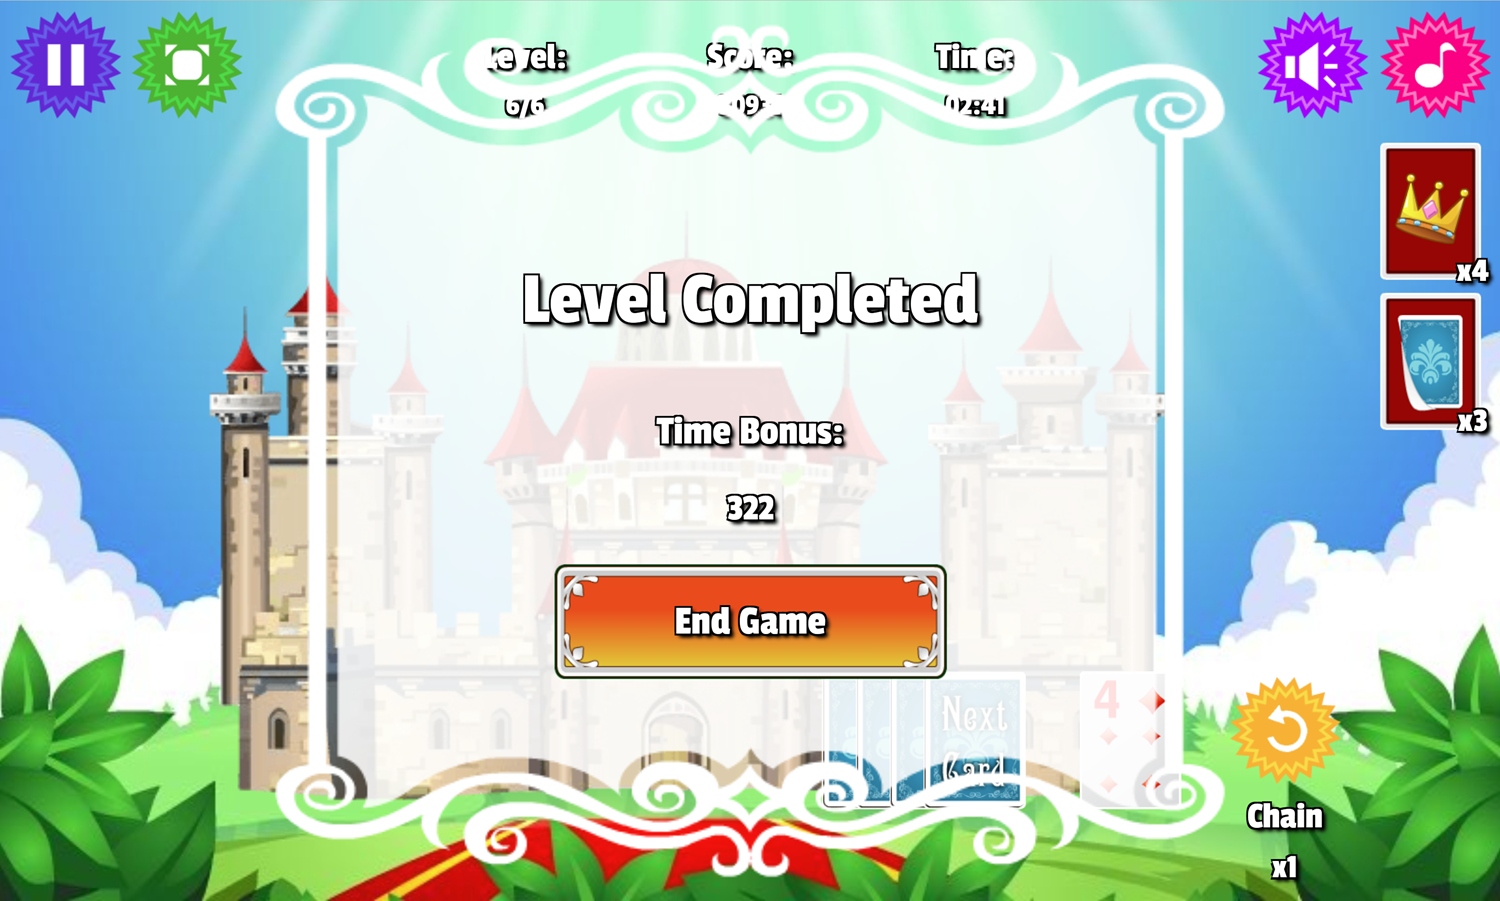 Magic Castle Solitaire Game Level Completed Screen Screenshot.